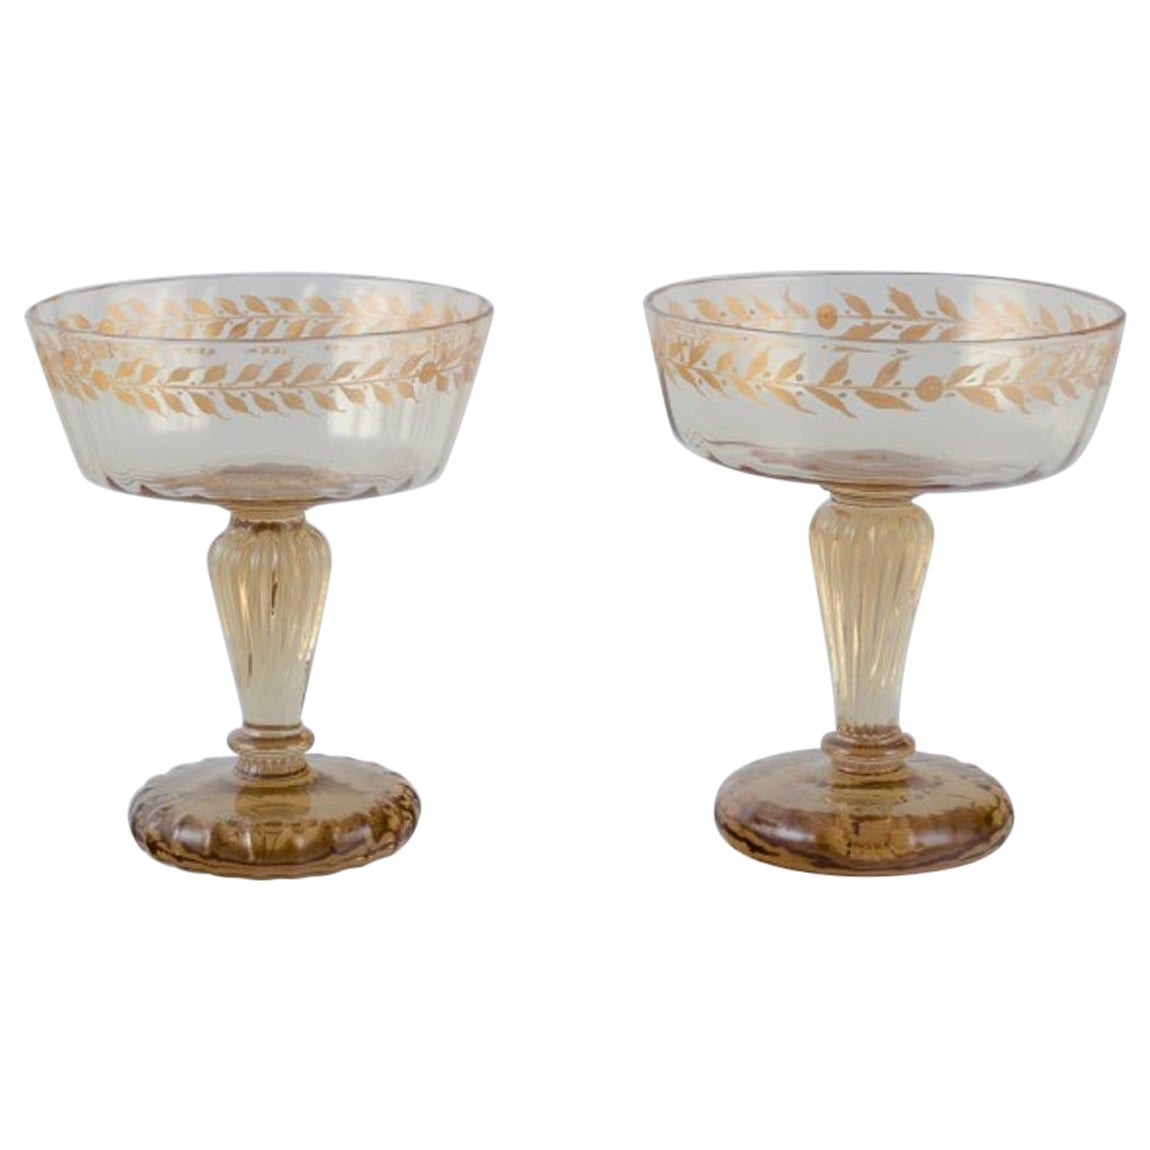 Emile Gallé, French artist and designer. Two champagne coupes in crystal glass